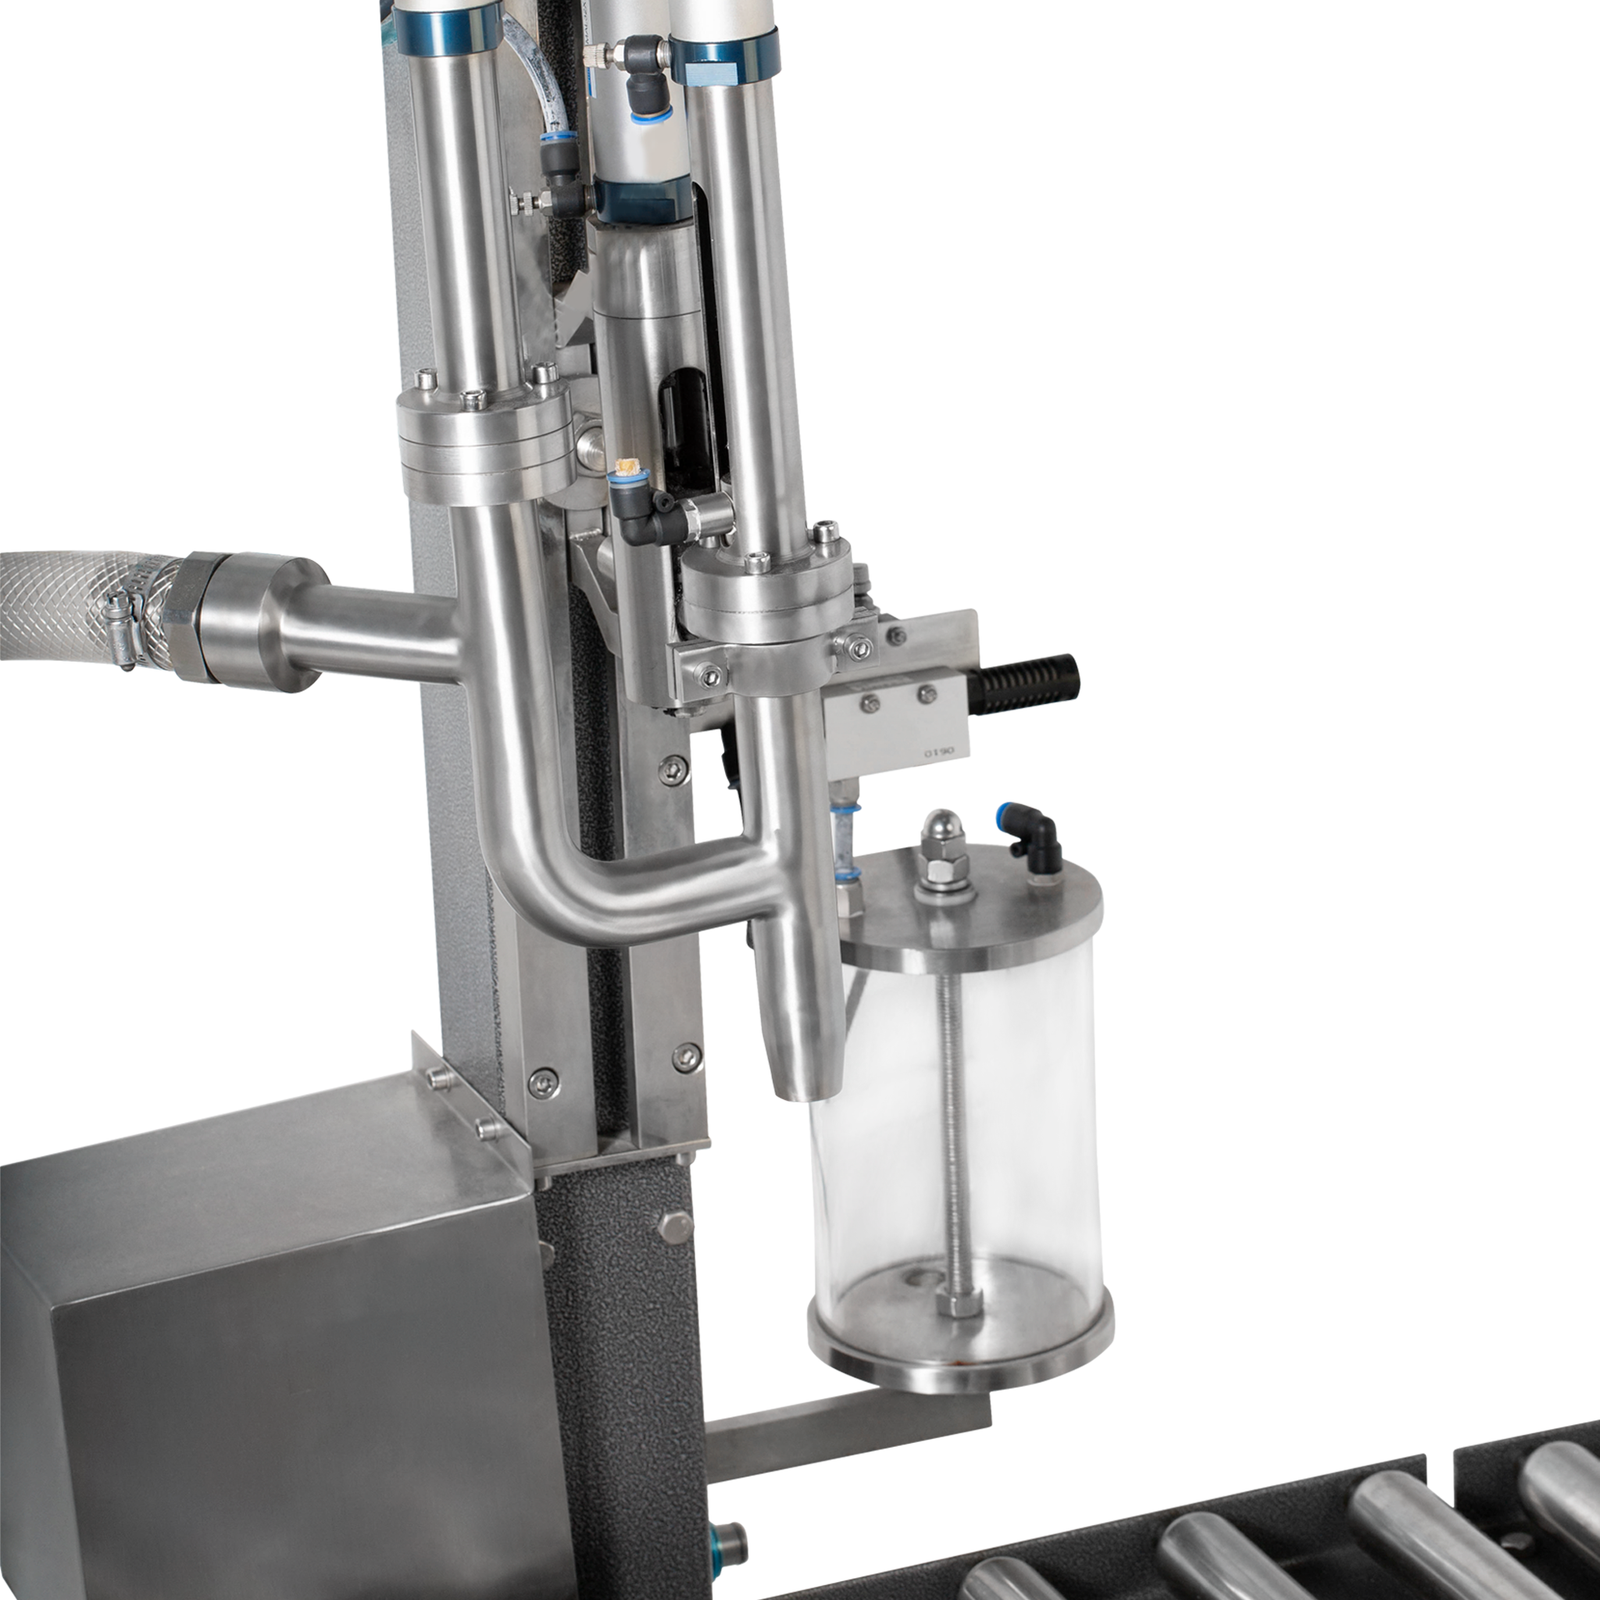 Closeup image shows attachment of the suction hose and the dispensing nozzle of the jorestech liquid net weight filler.